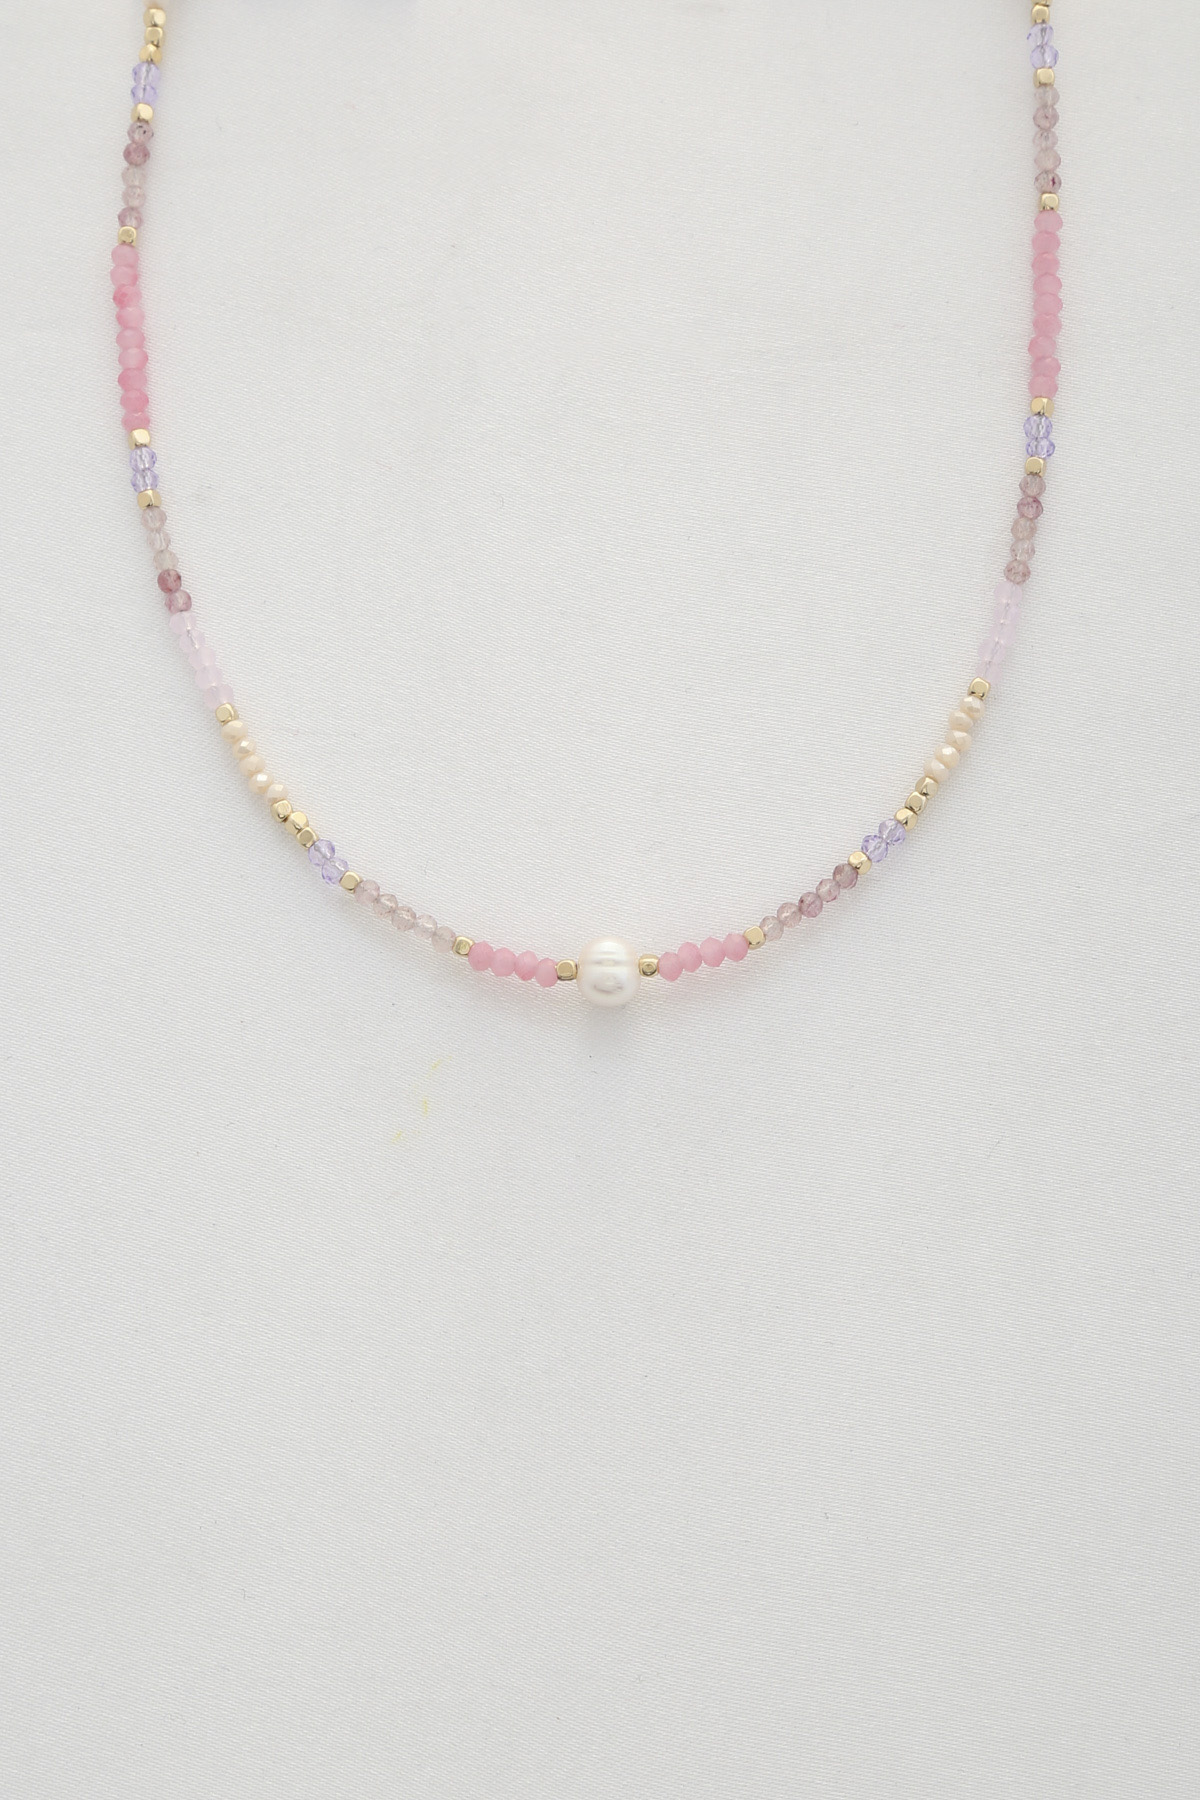 FRESH WATER PERAL BEADED NECKLACE